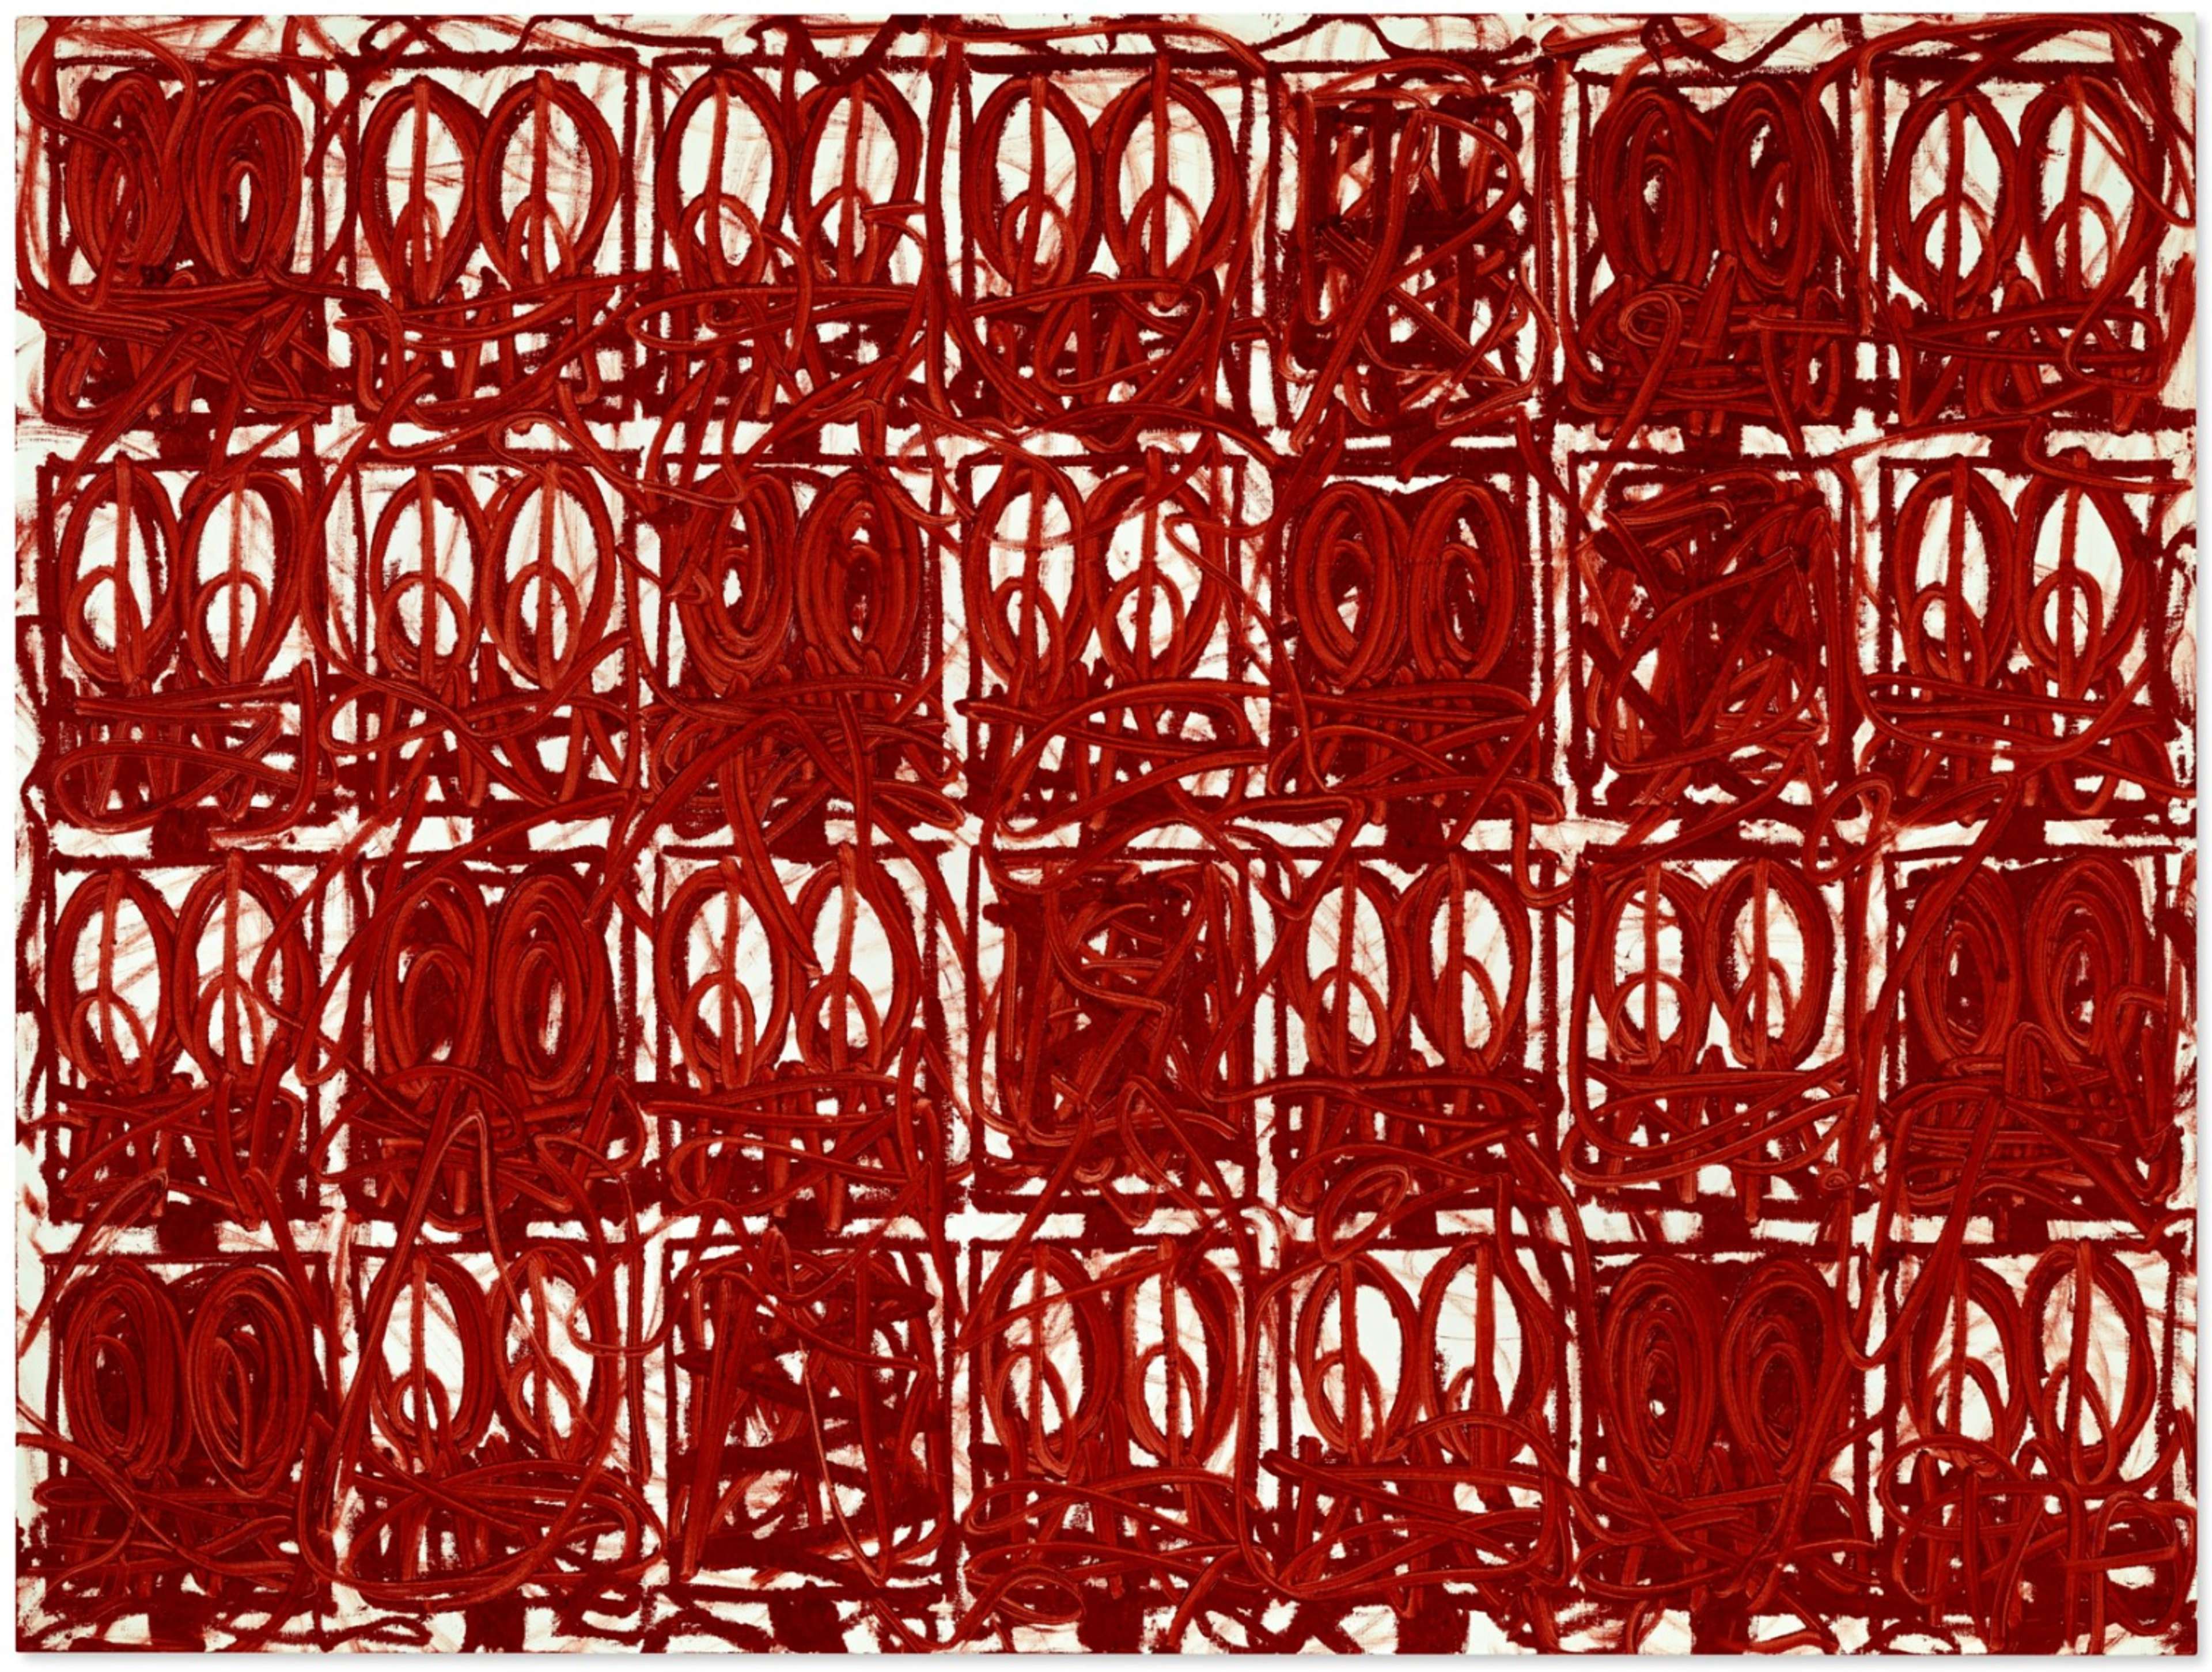 An artwork by Rashid Johnson with rows of abstract, scribbled faces in a grid-like arrangement. The faces are painted with expressive brushstrokes in red against a white canvas.